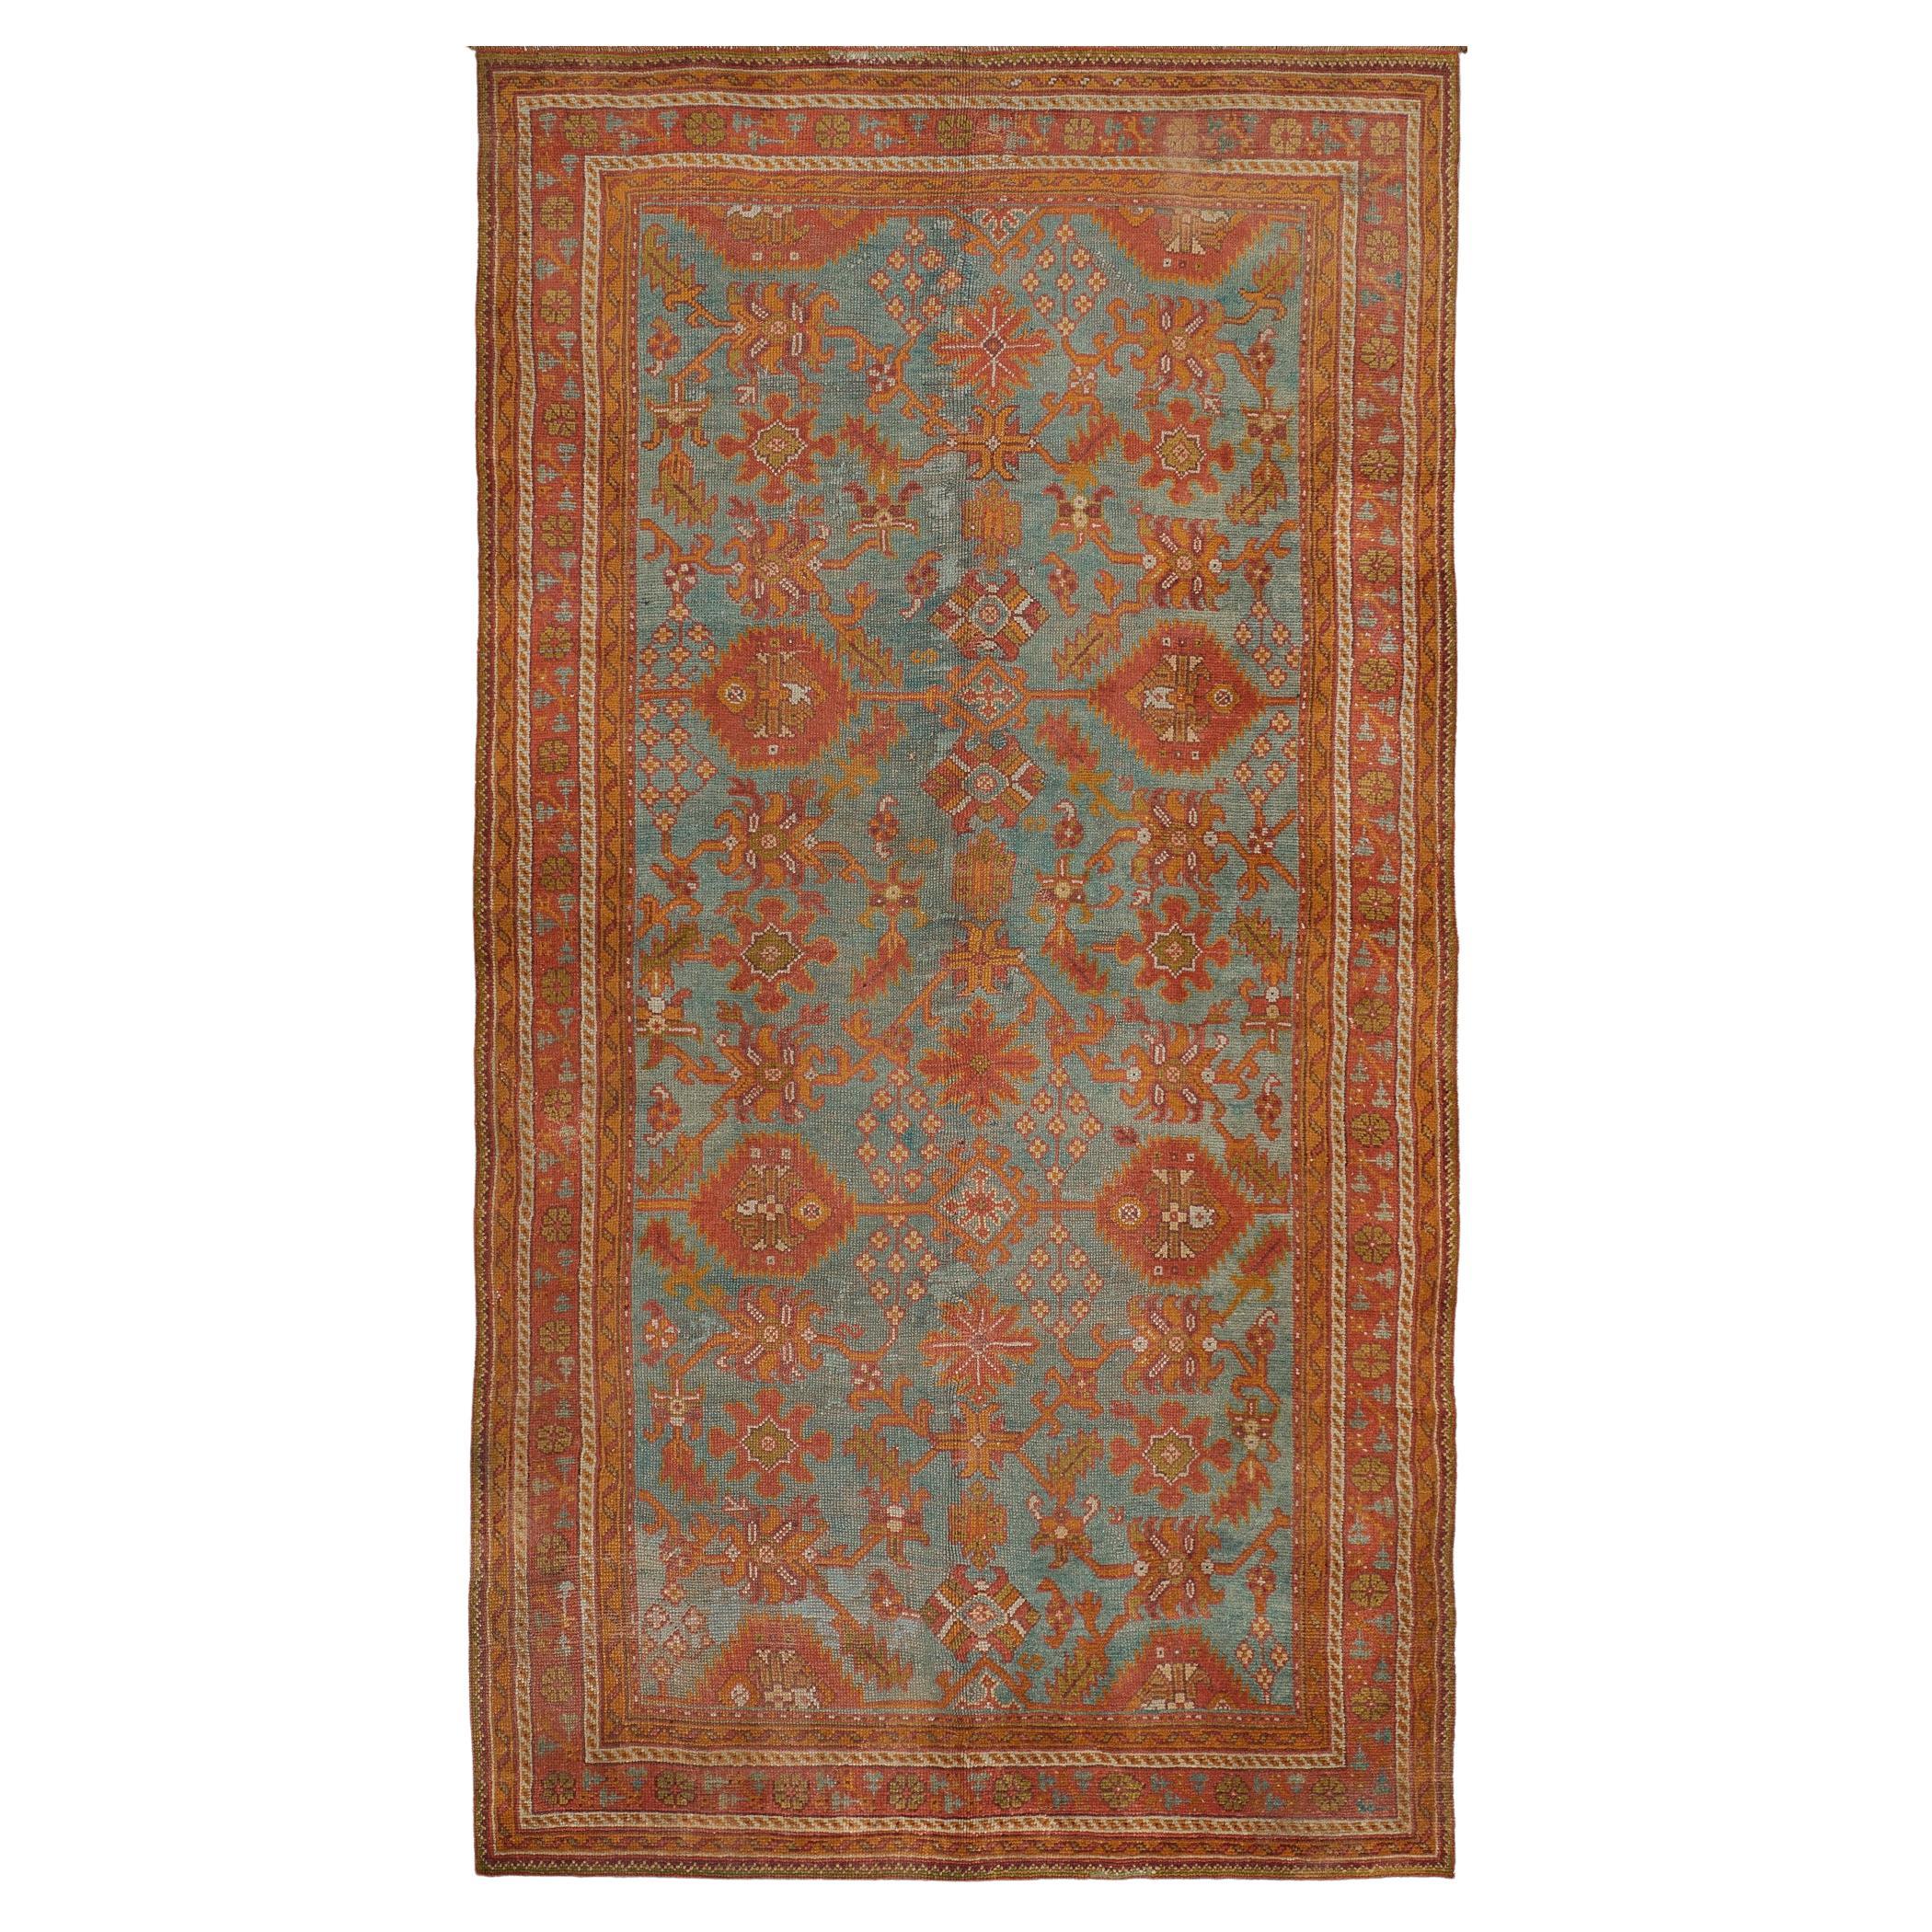 Antique Sea-Blue and Tomato-Red Wool Oushak Rug